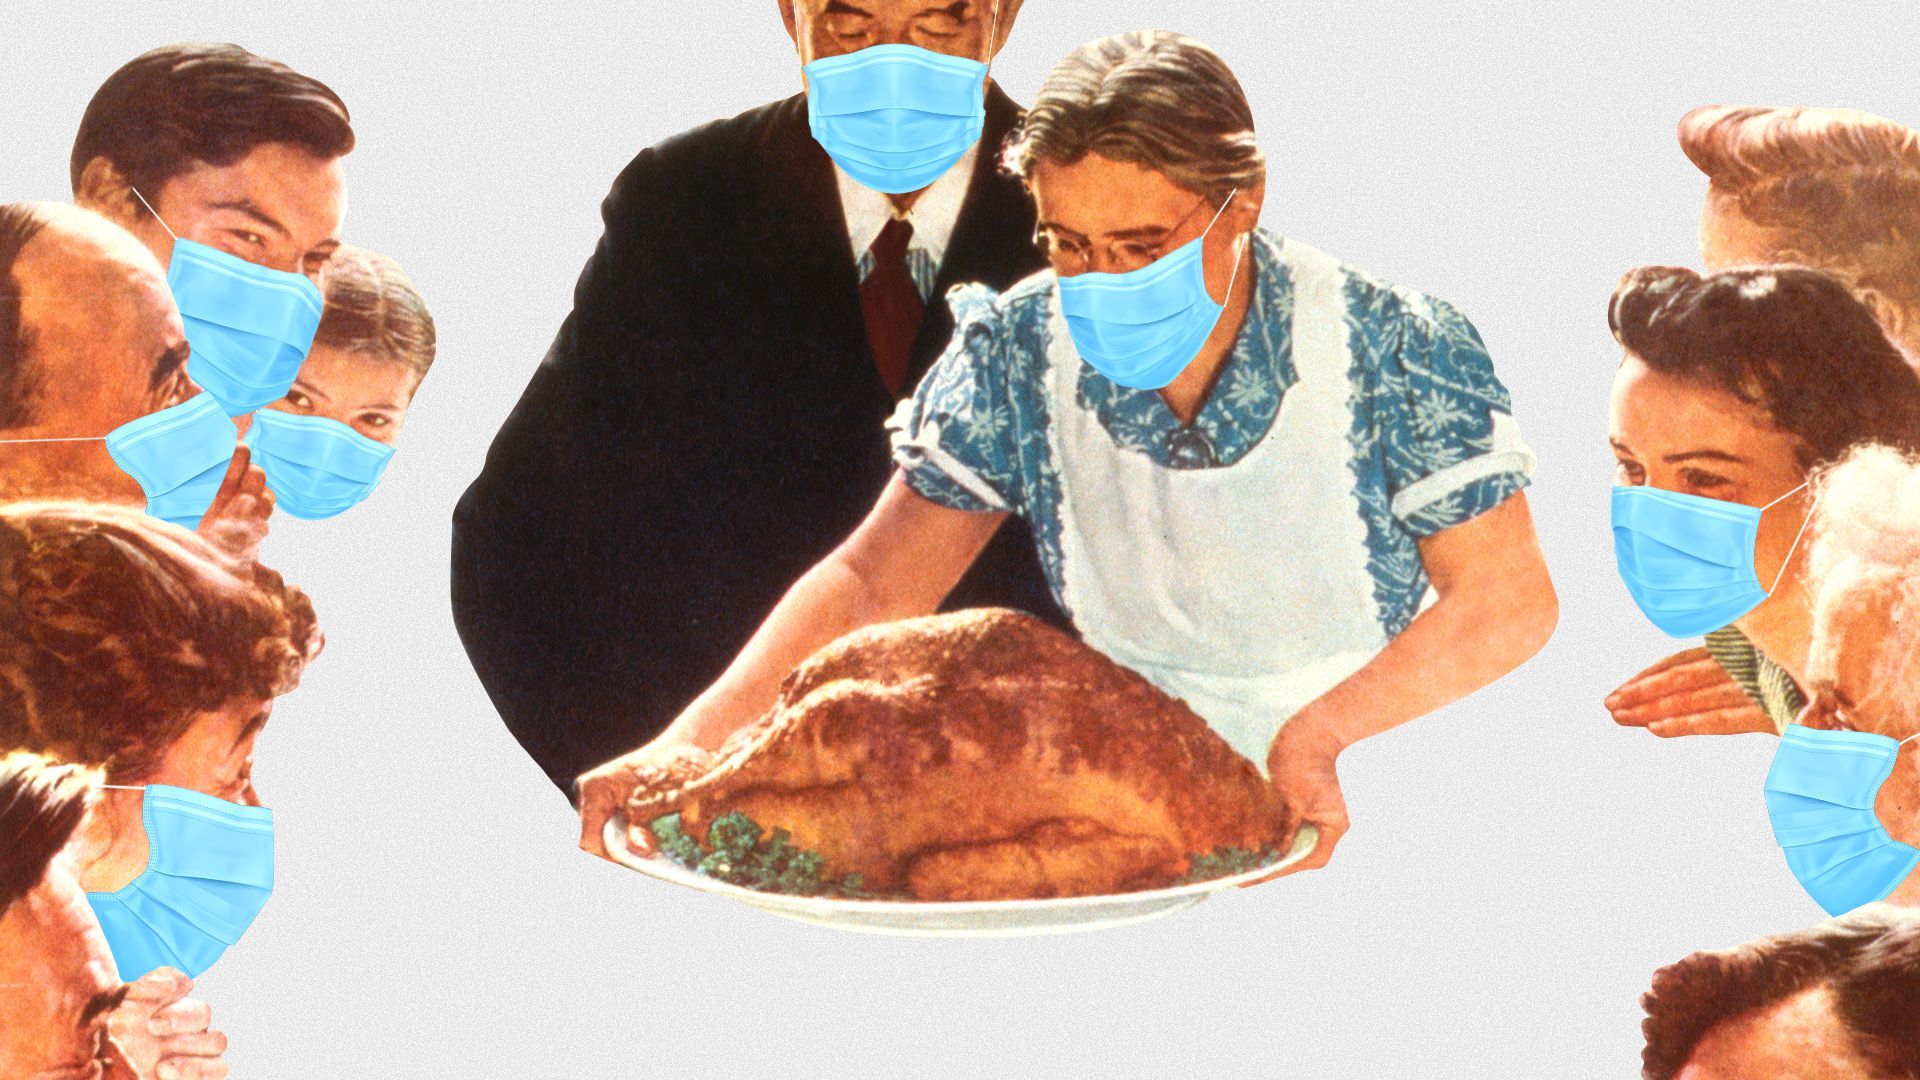 Photo illustration of the Freedom from Want image by Norman Rockwell with all the participants of the dinner wearing surgical masks. 